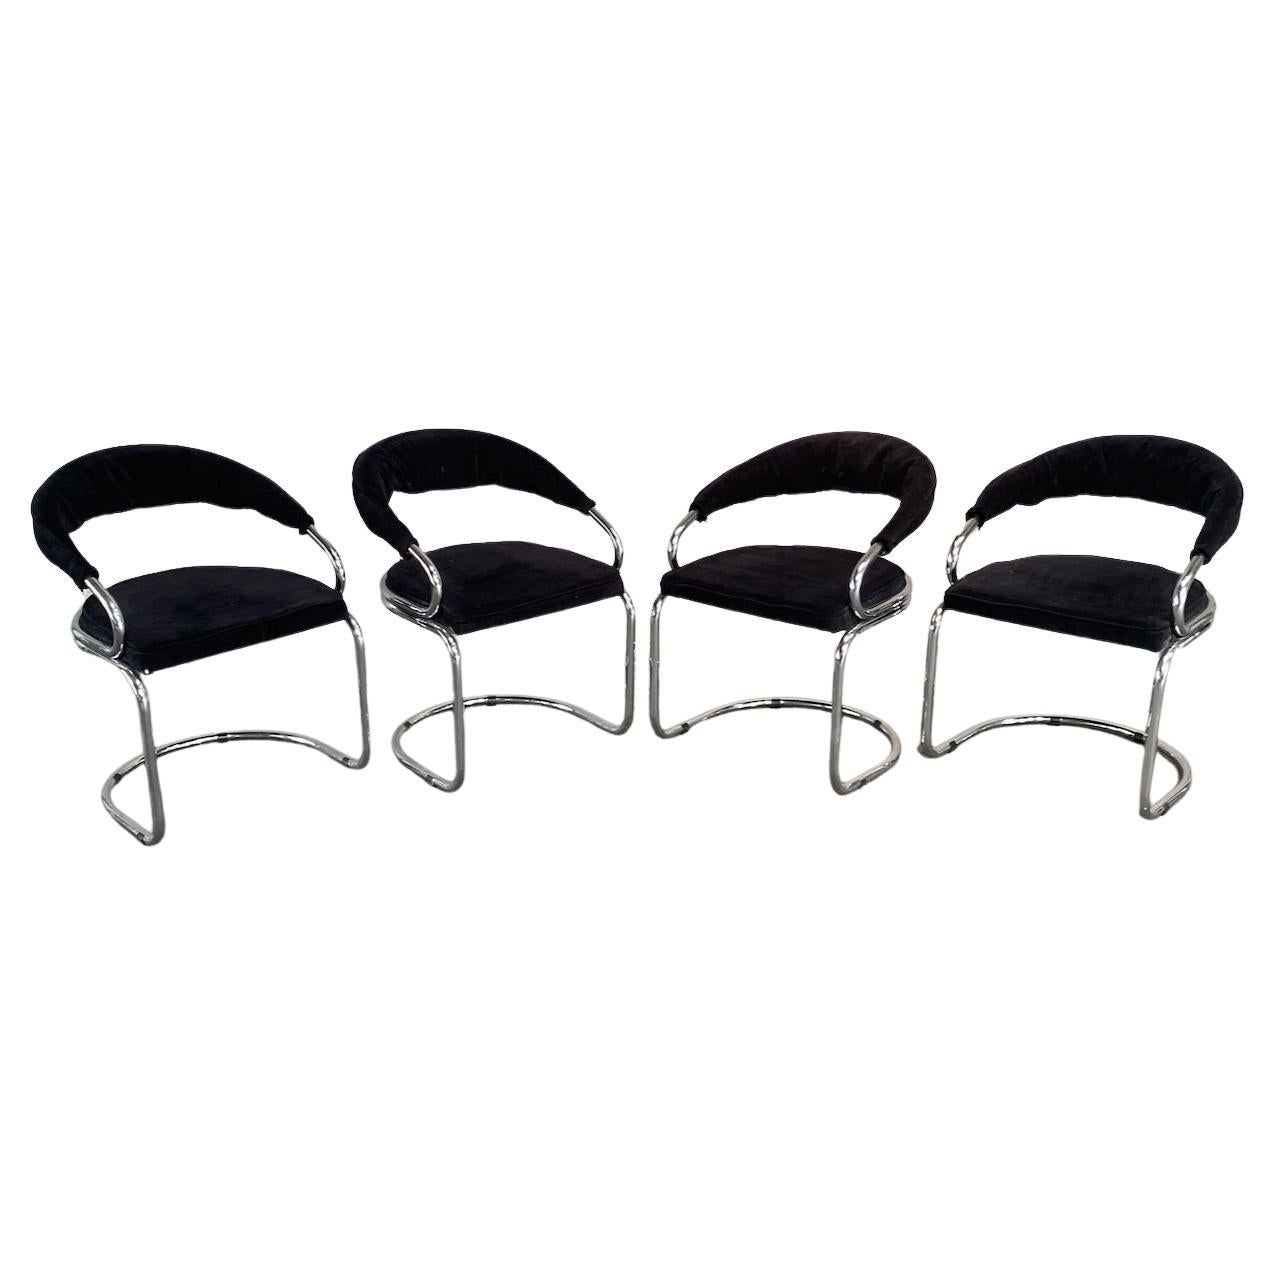 Set of 4 chairs by Giotto Stoppino for Kartell.